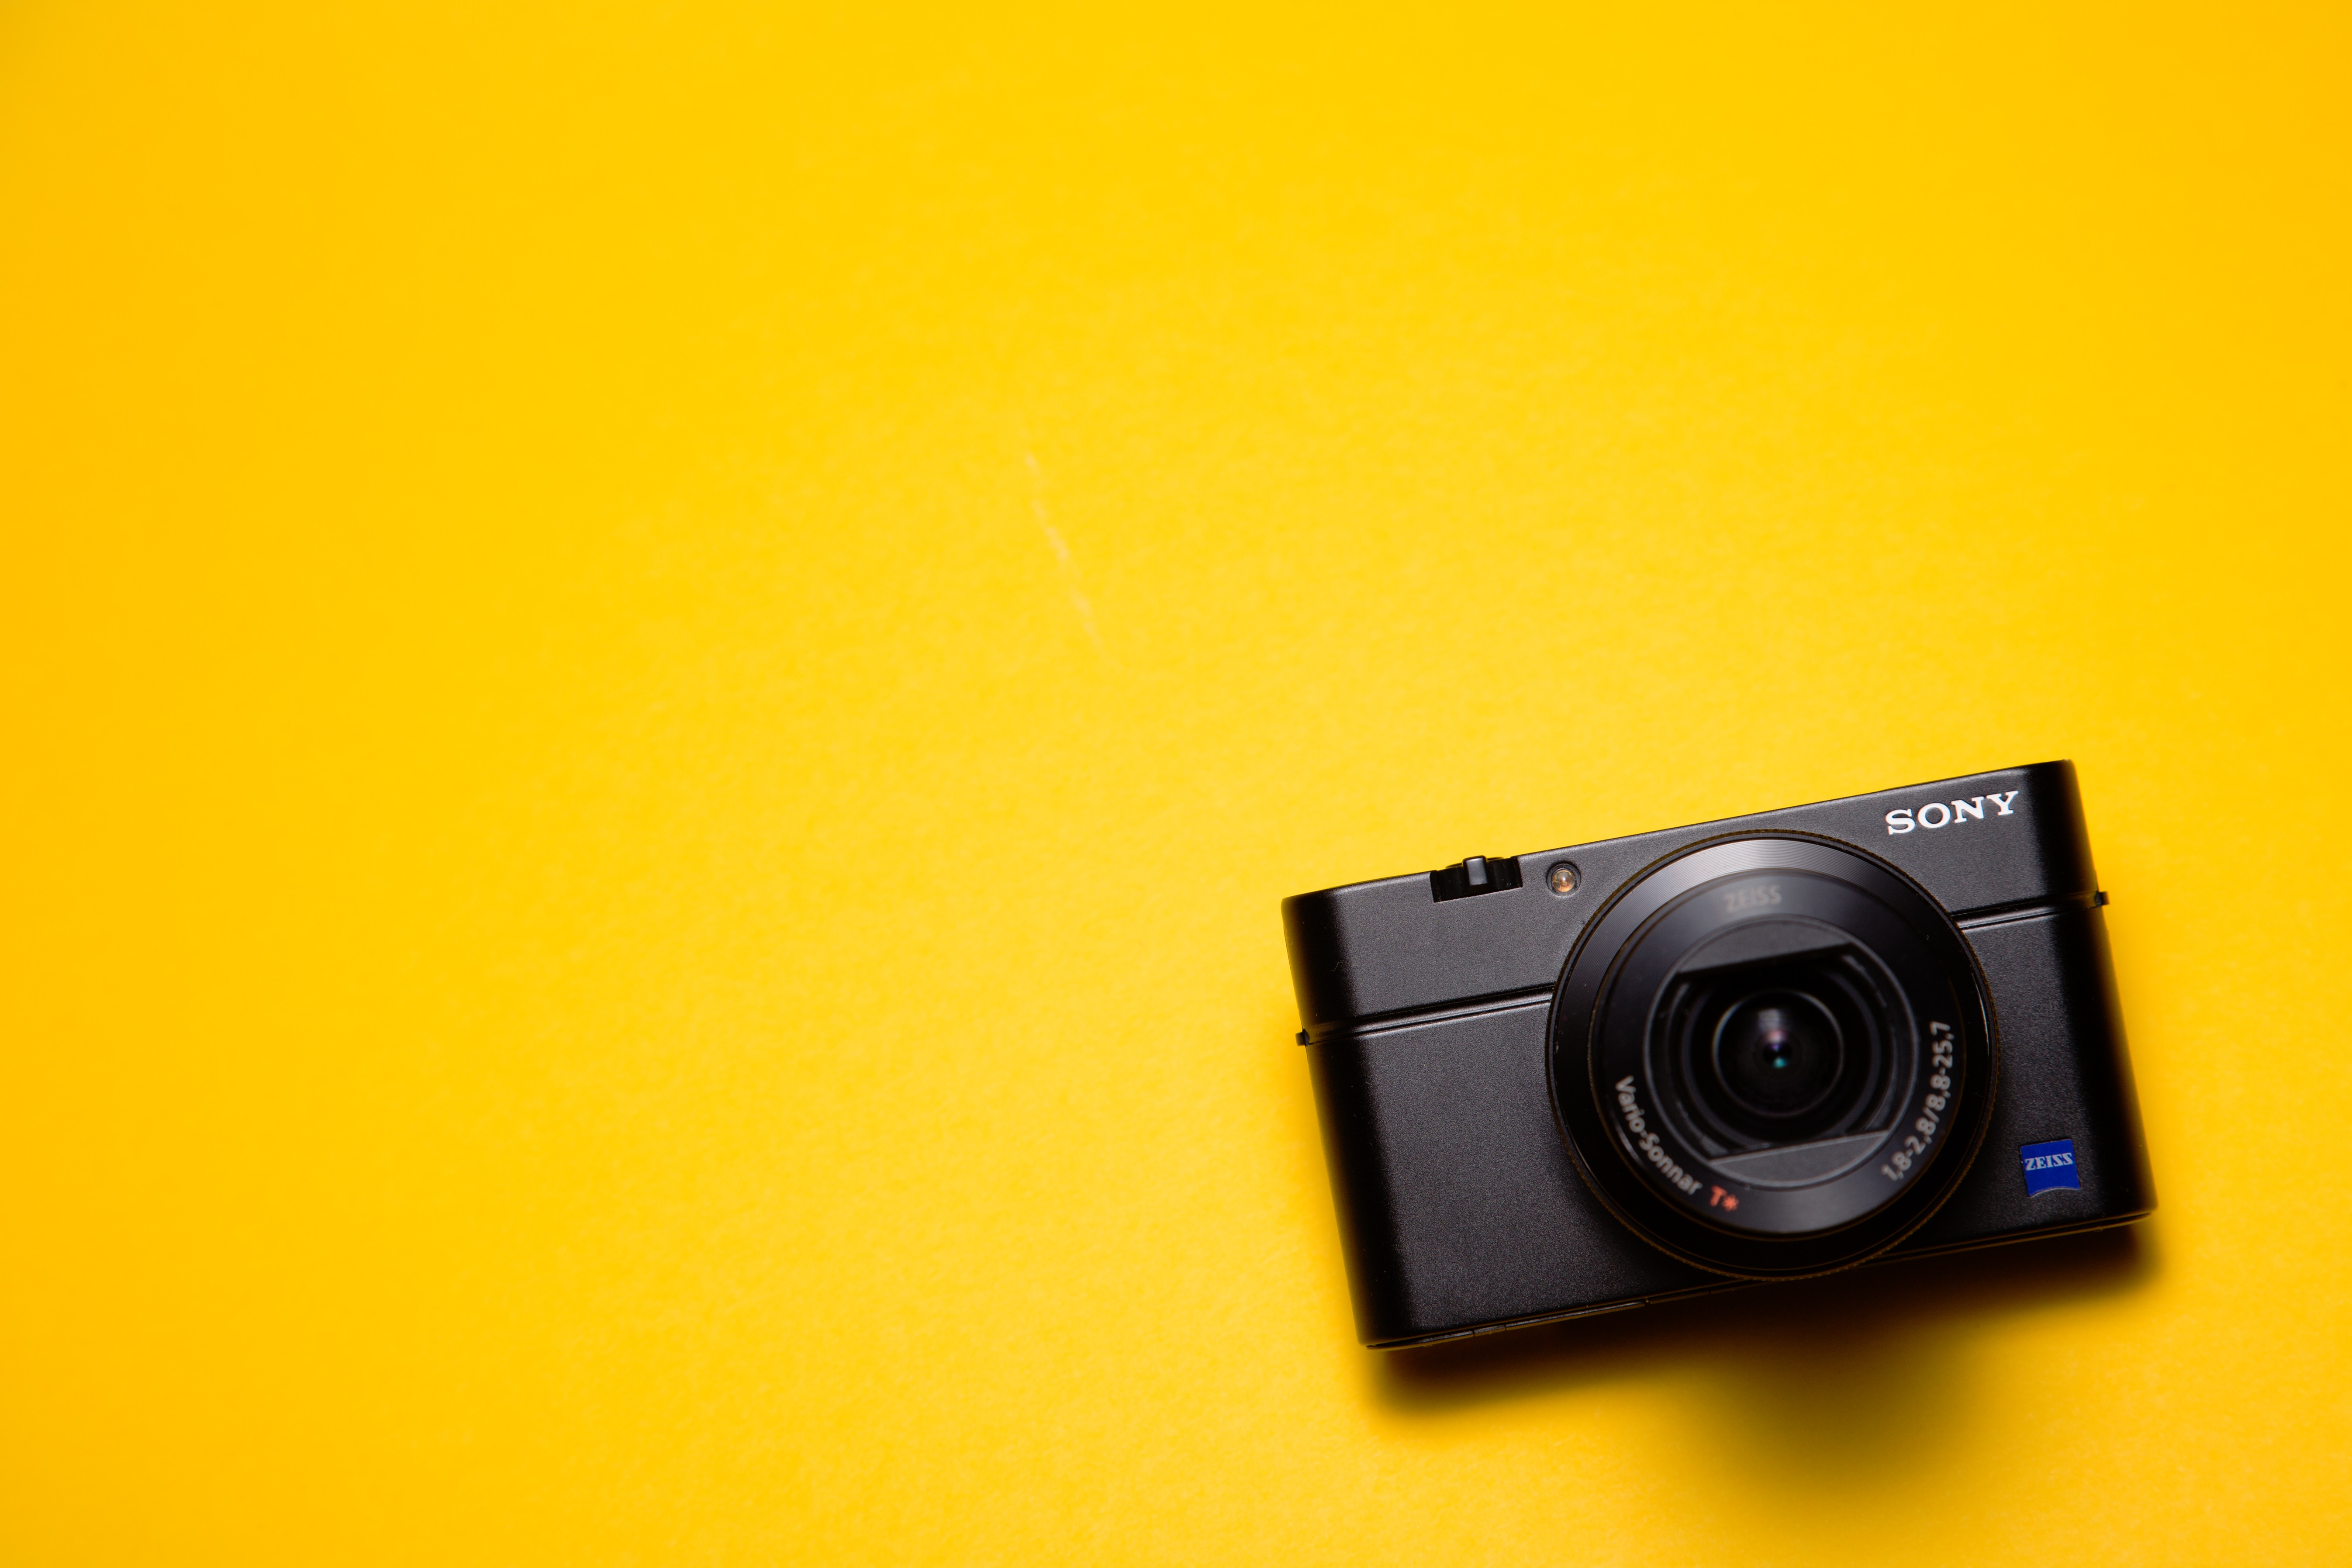 camera on a yellow background